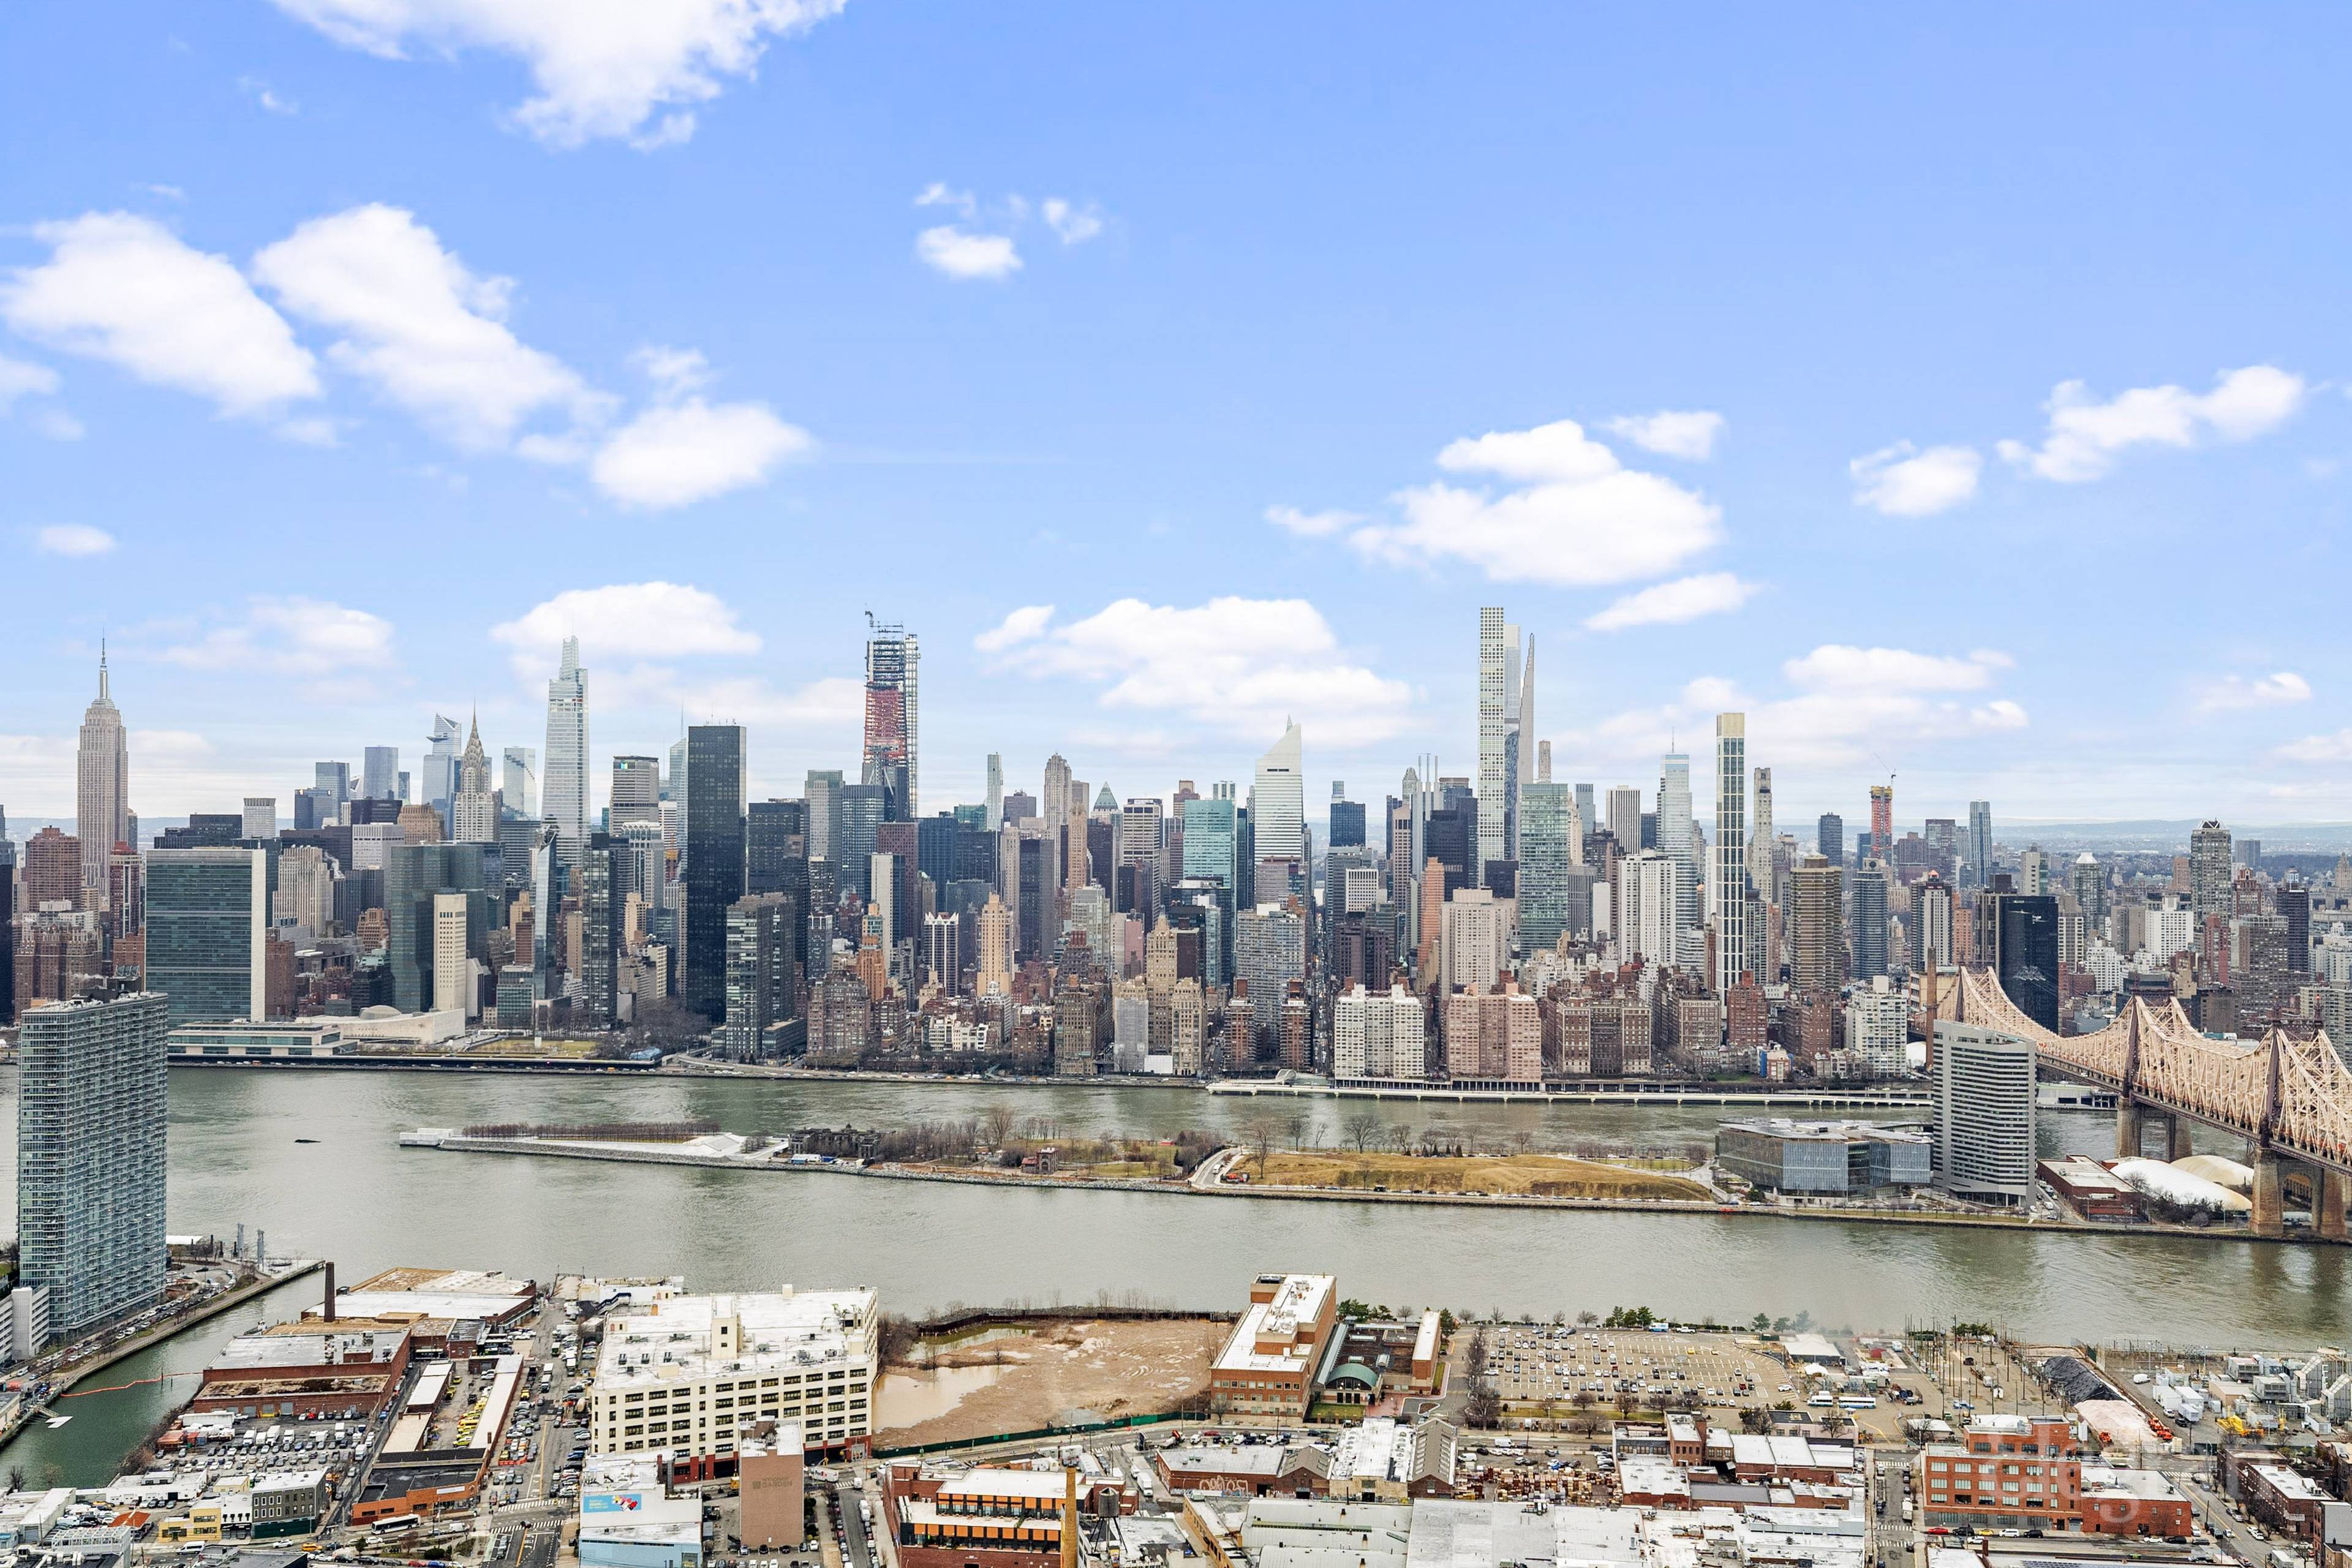 Why Unit 5801 Stunning Panoramic Manhattan Skyline and East River Views throughout every room.